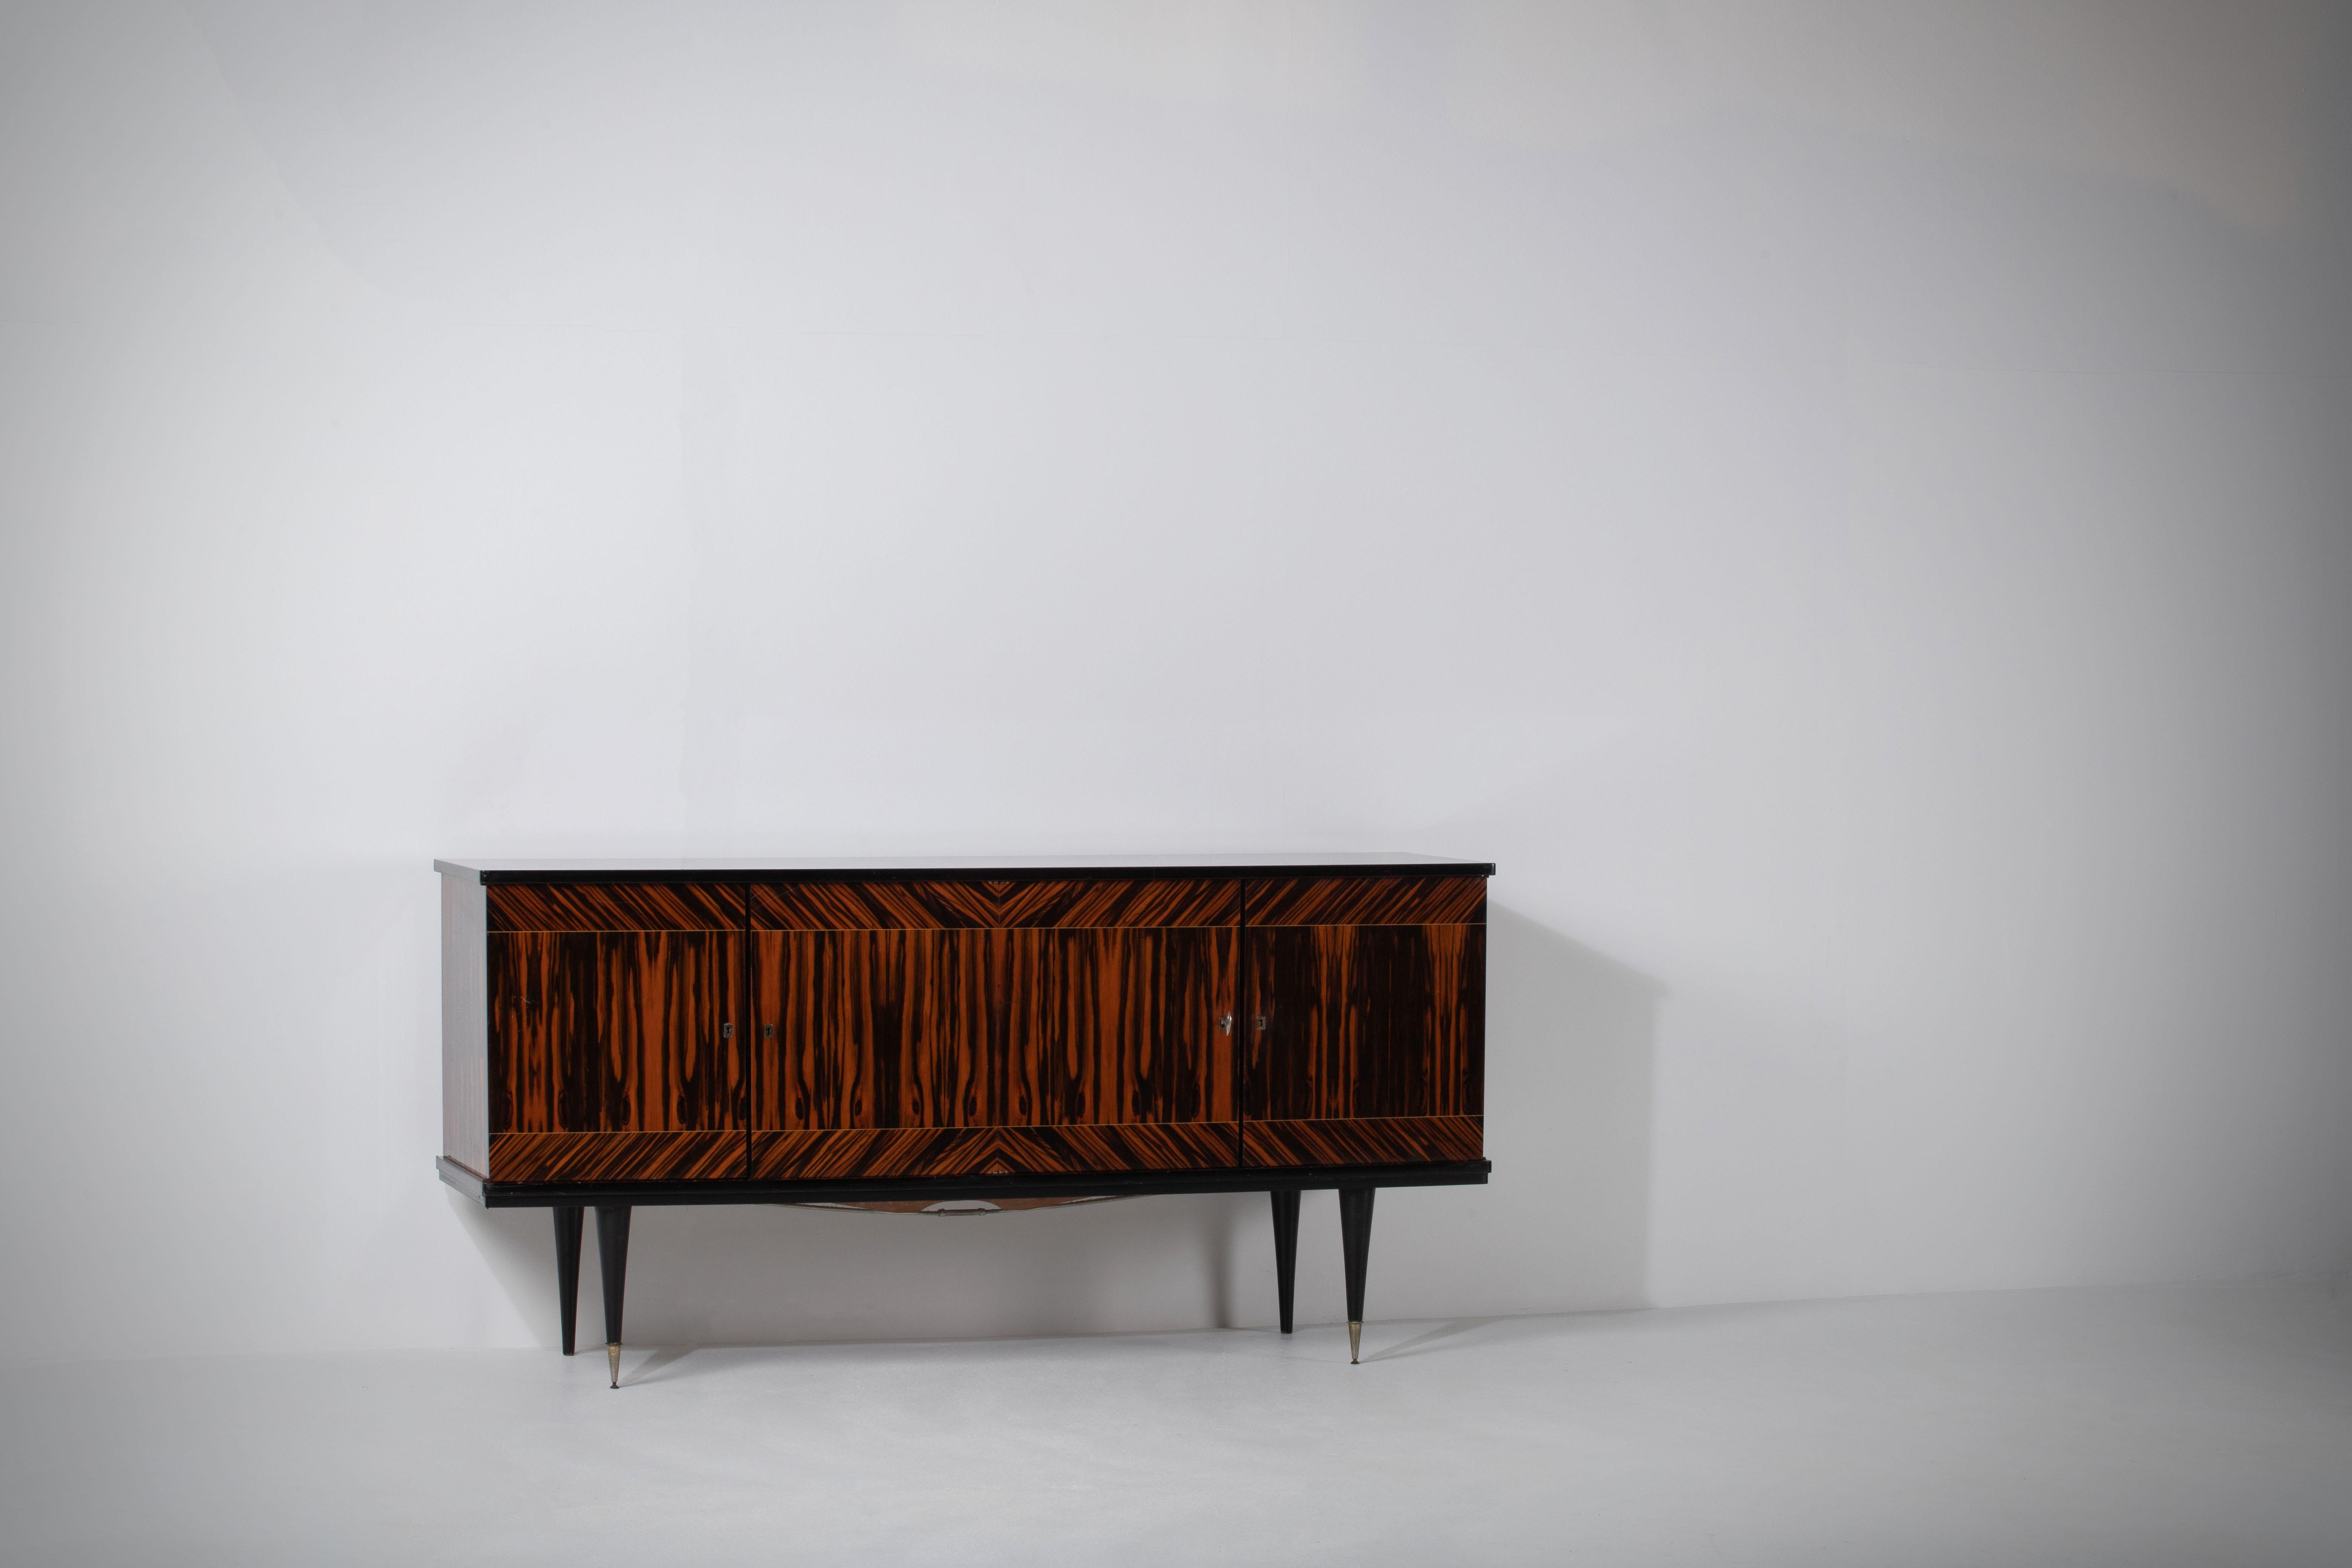 French Art Deco sideboard, credenza, with bar cabinet. 
The sideboard features stunning Macassar wood grain and rich pattern. It offers ample storage, with shelves.
The case rests on tall tapered legs with brass details. 
A unique blend of Art